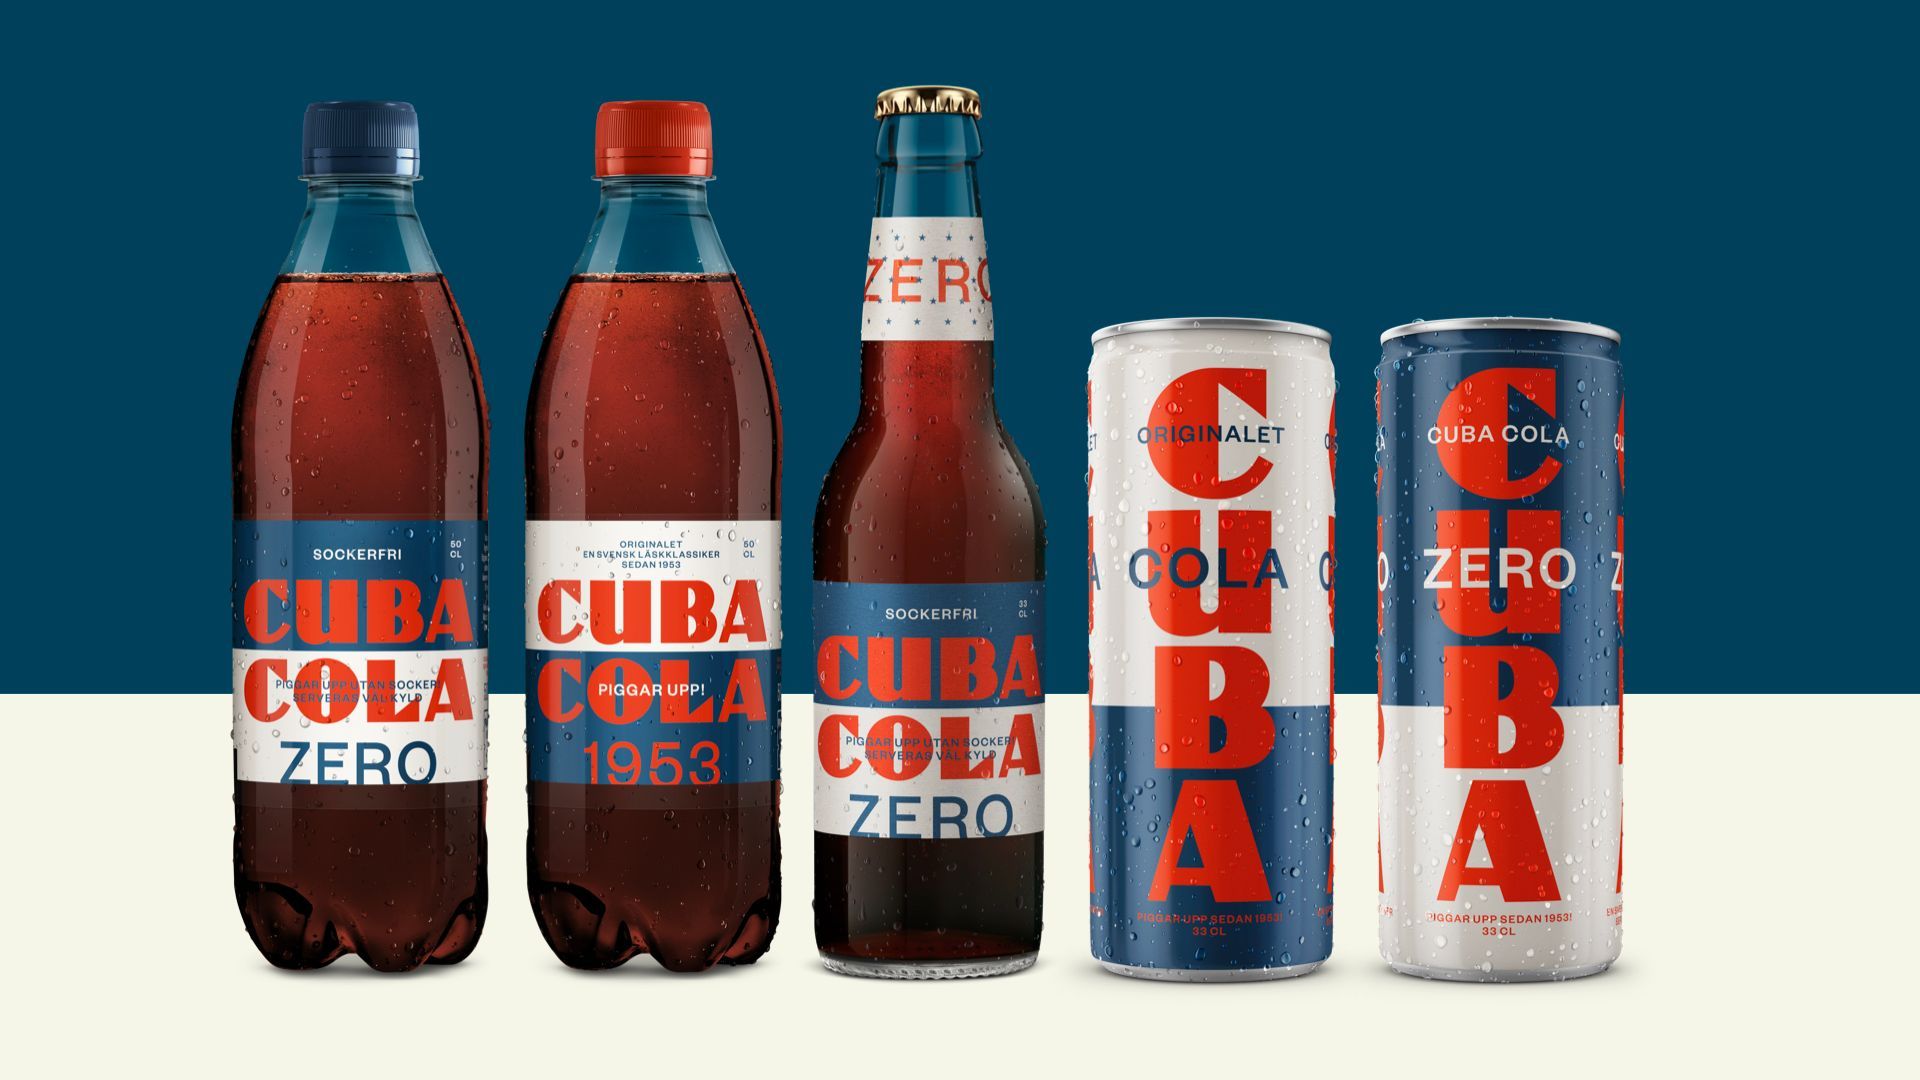 cuba-cola_zero-sugar_launched-1953-sweden_first-cola-drink-sold-in-sweden_updated-taste-and-new-design_Cola-Zero.com